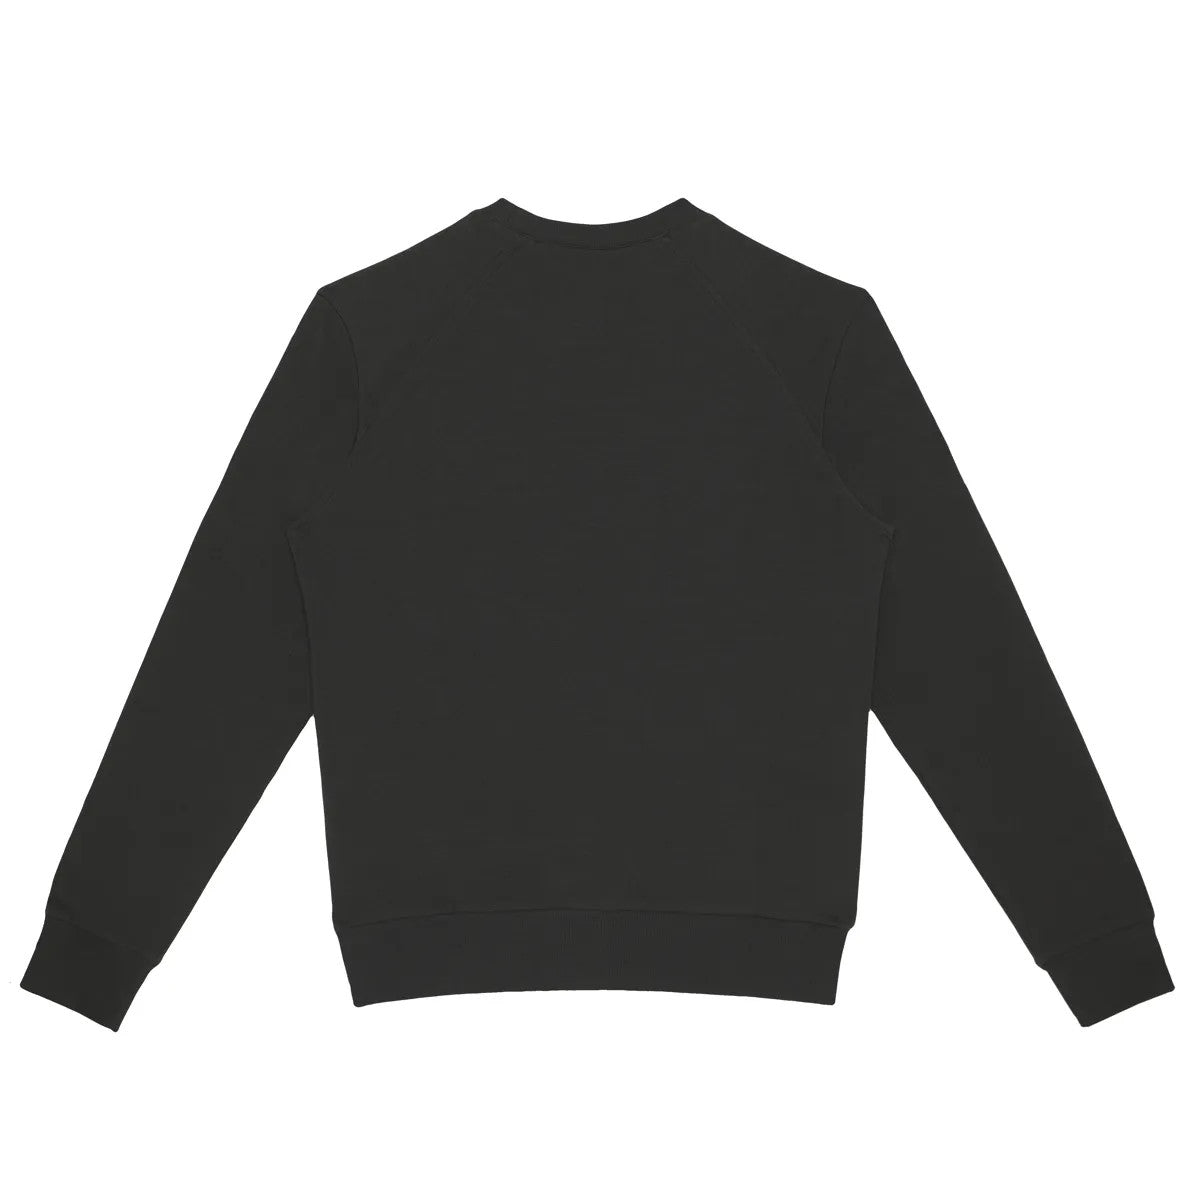 Little hedonist soft organic cotton fleece sweater. Cuffs made from rib. Just the perfect sweater!